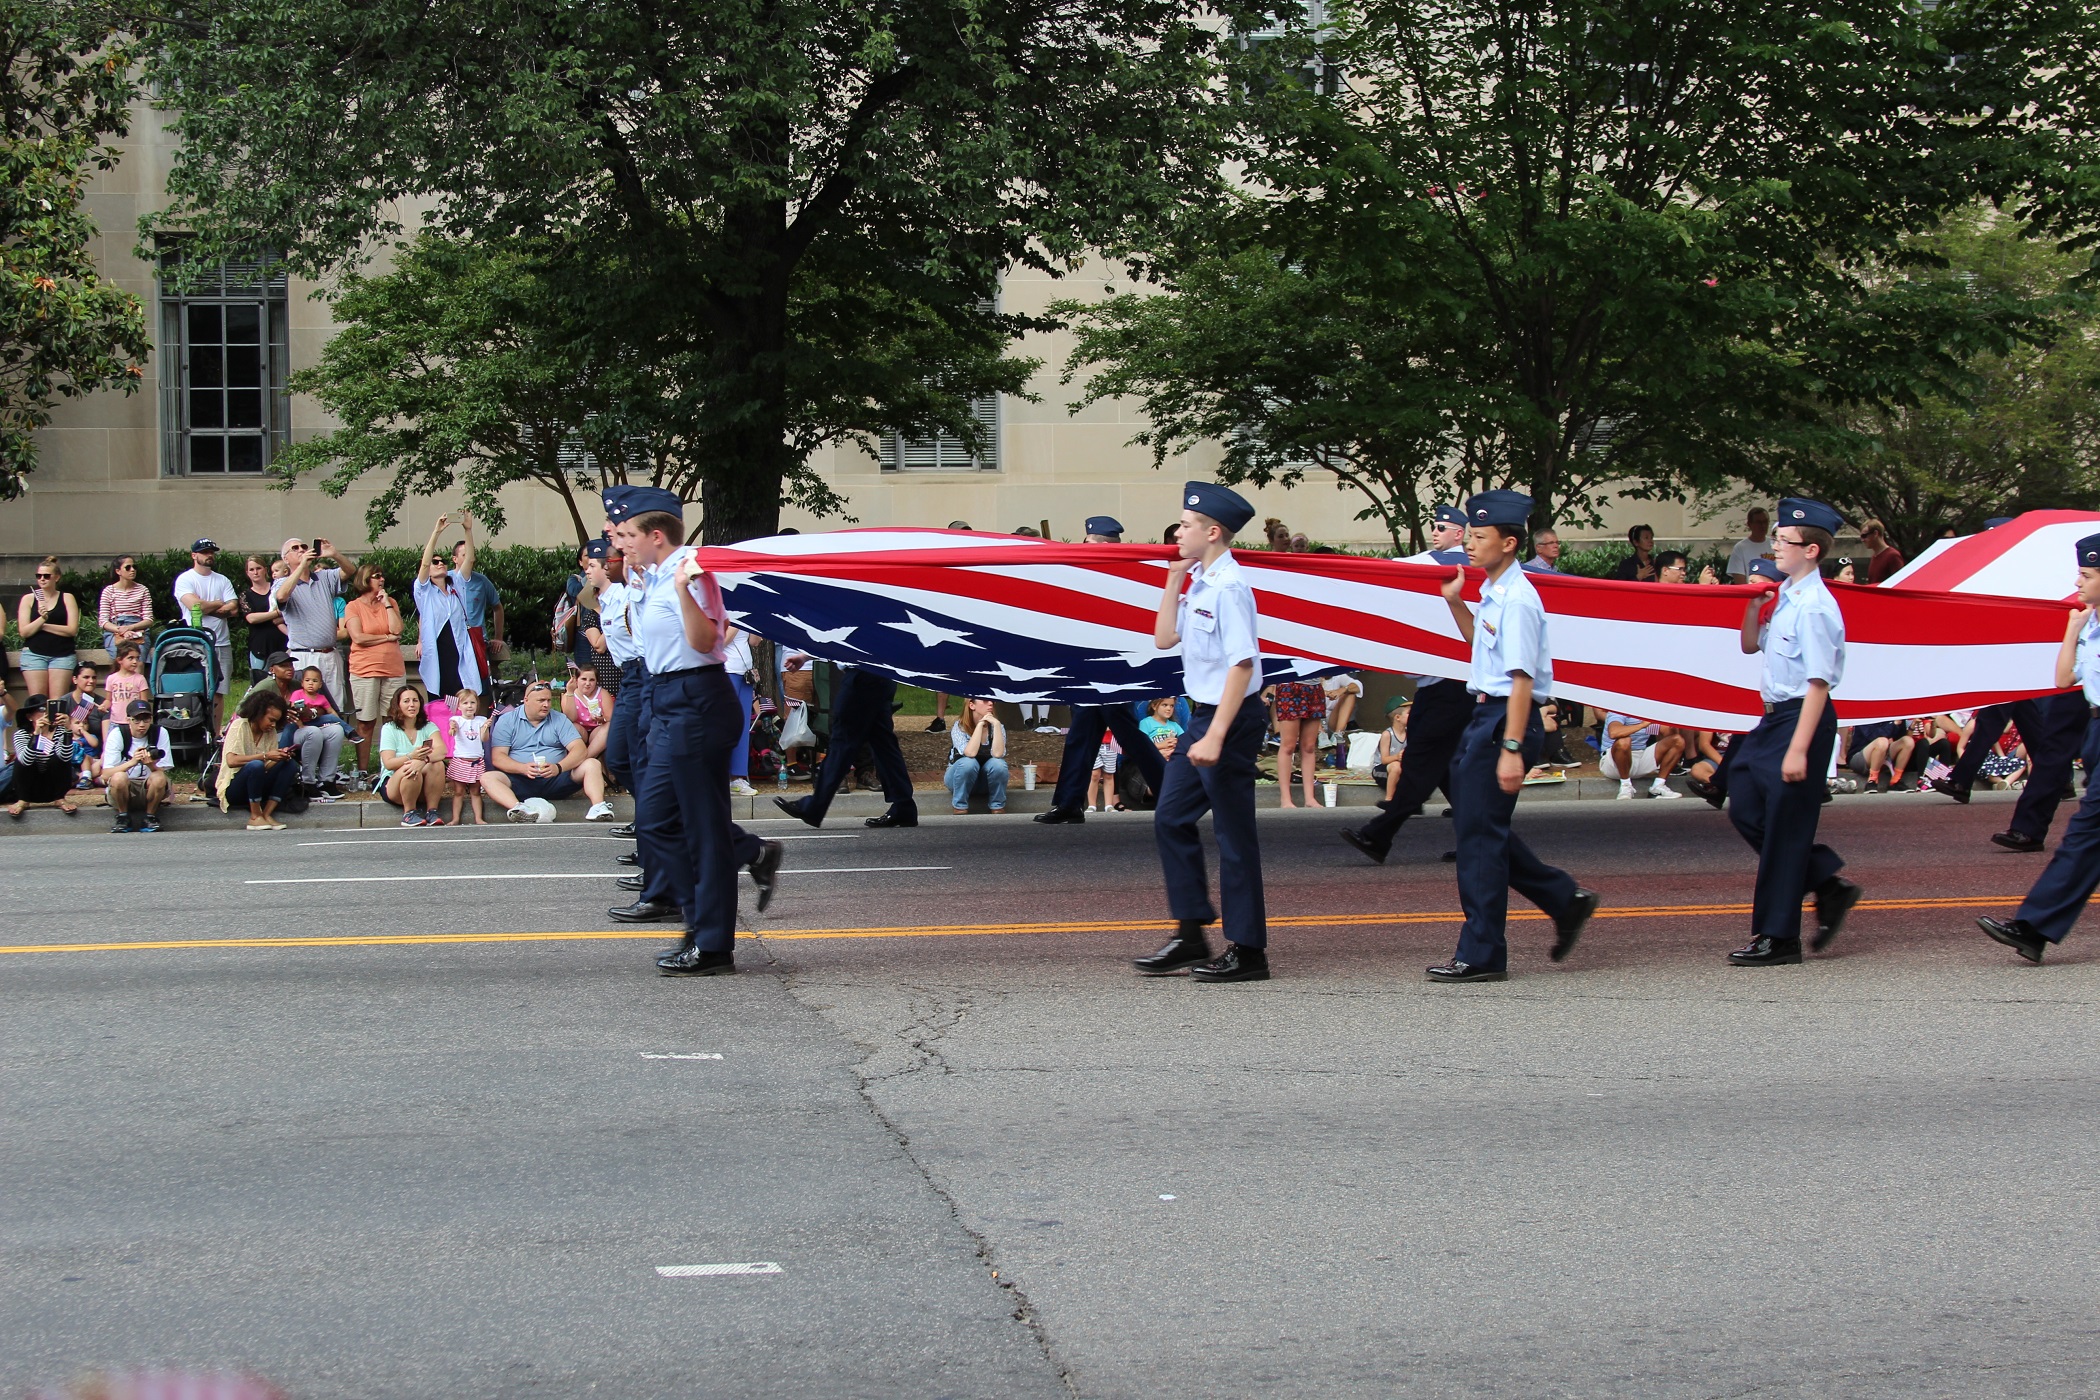 A picture of the army people holding the American flag